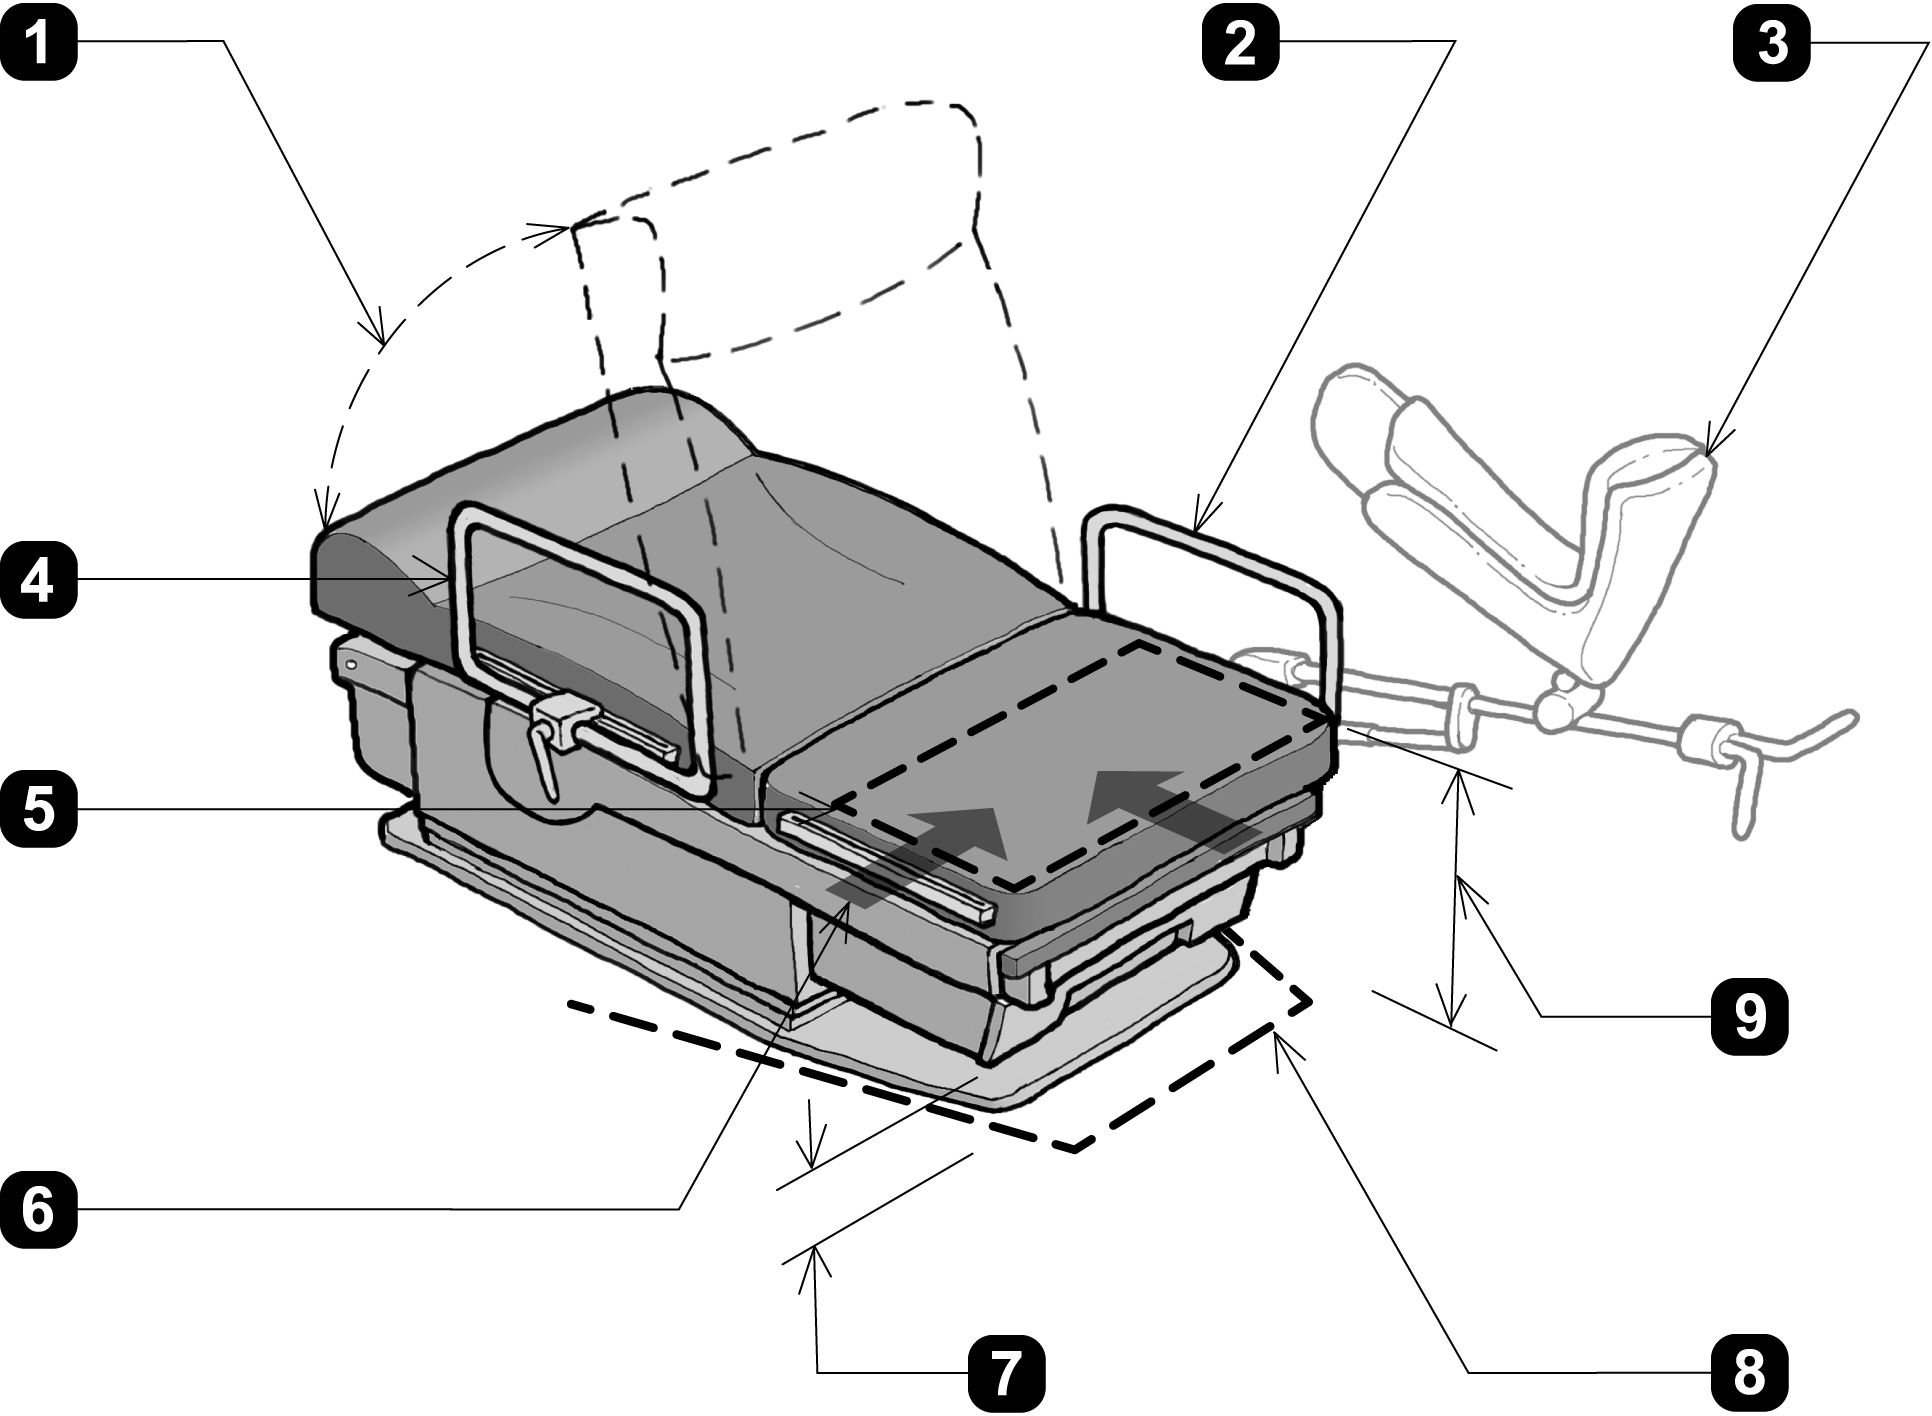 Three-dimensional view of a height adjustable exam table showing features and minimum dimensions required by the proposed Standards.